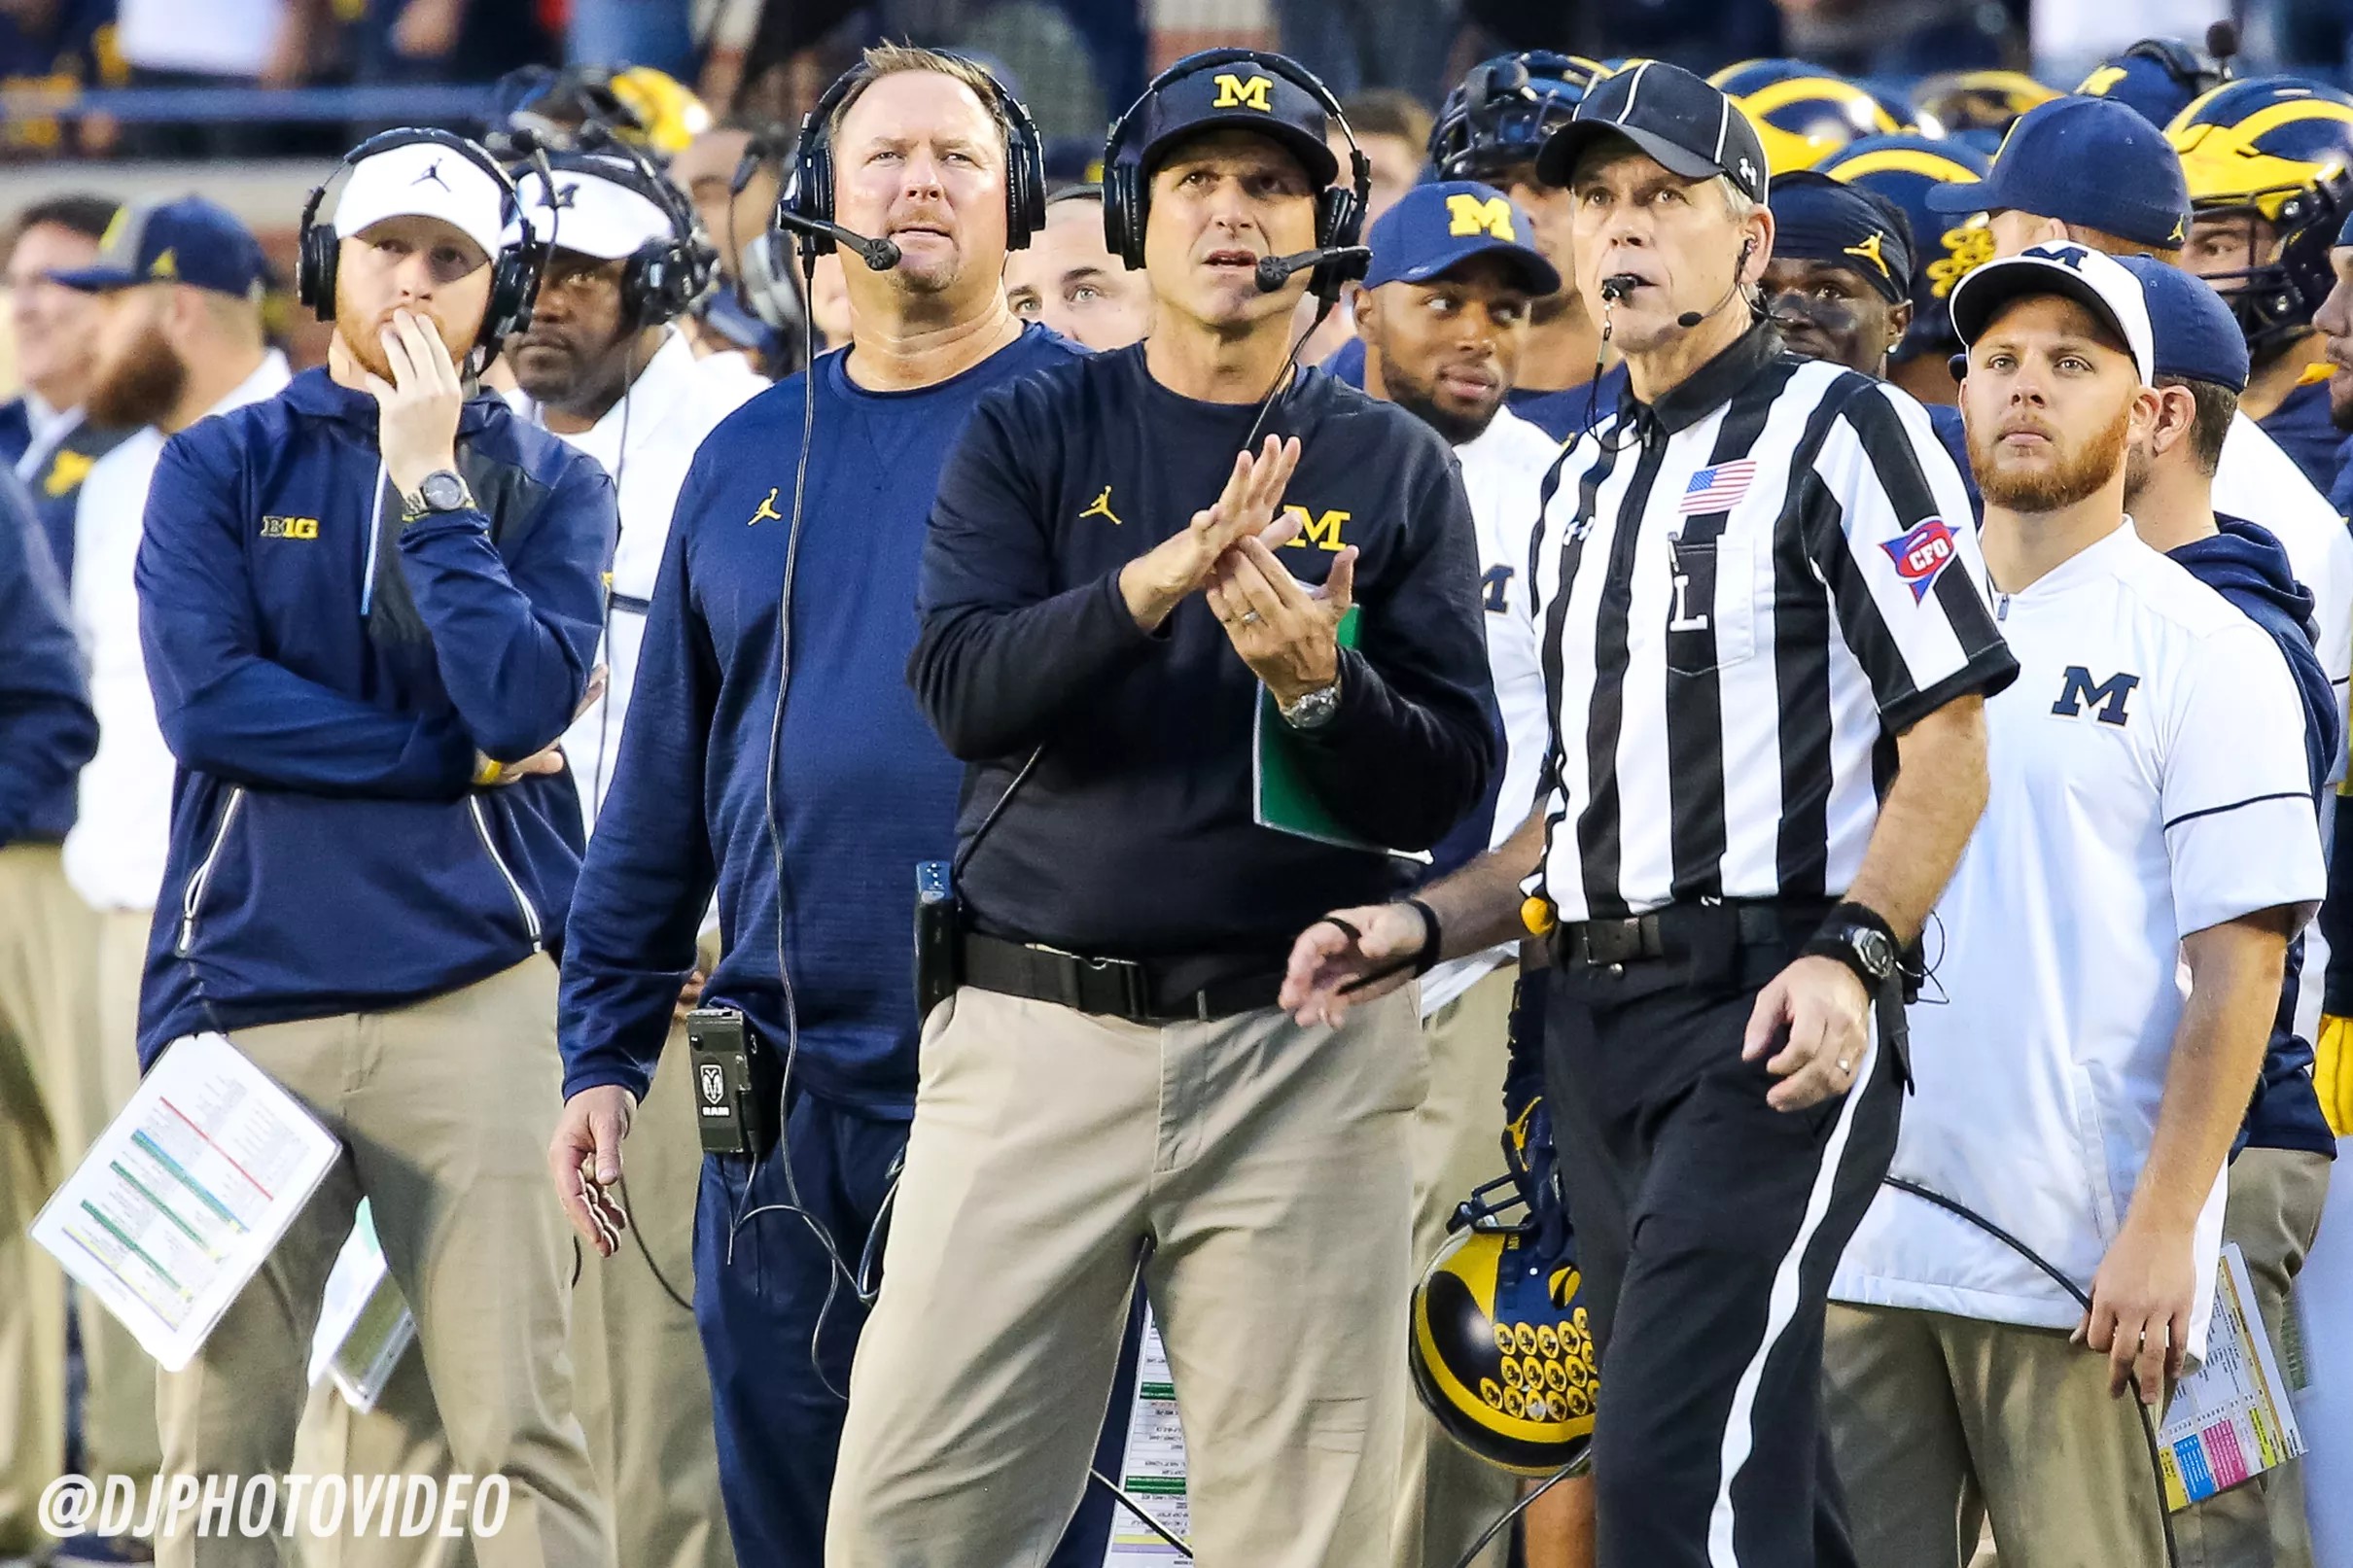 A history of bye weeks for Michigan under Jim Harbaugh